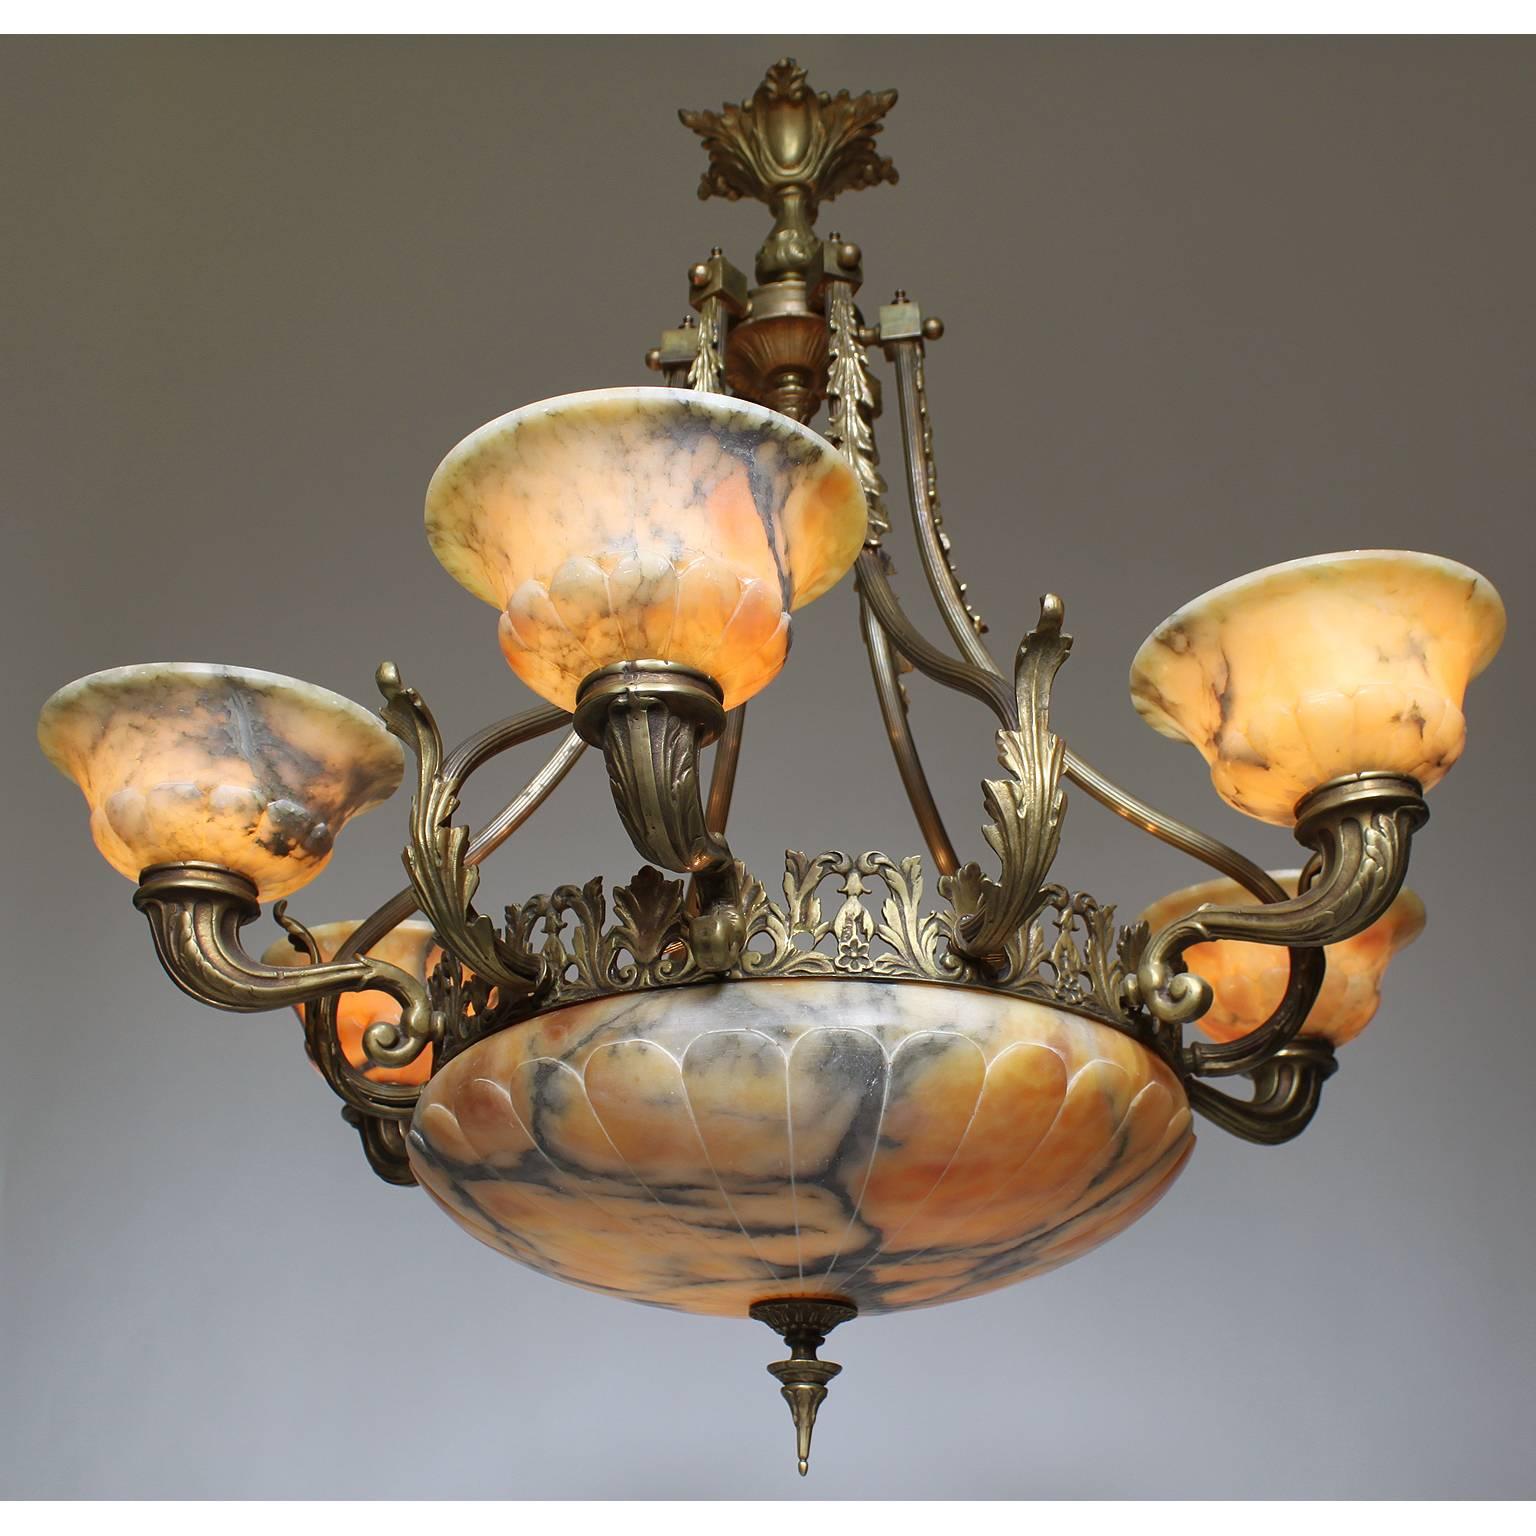 A French 20th century Art Deco bronze and veined caramel- colored alabaster six-light chandelier. The carved circular alabaster plafonnier with a floral apron and banded frame with six alabaster lights supported by cornucopia shaped bronze cups and